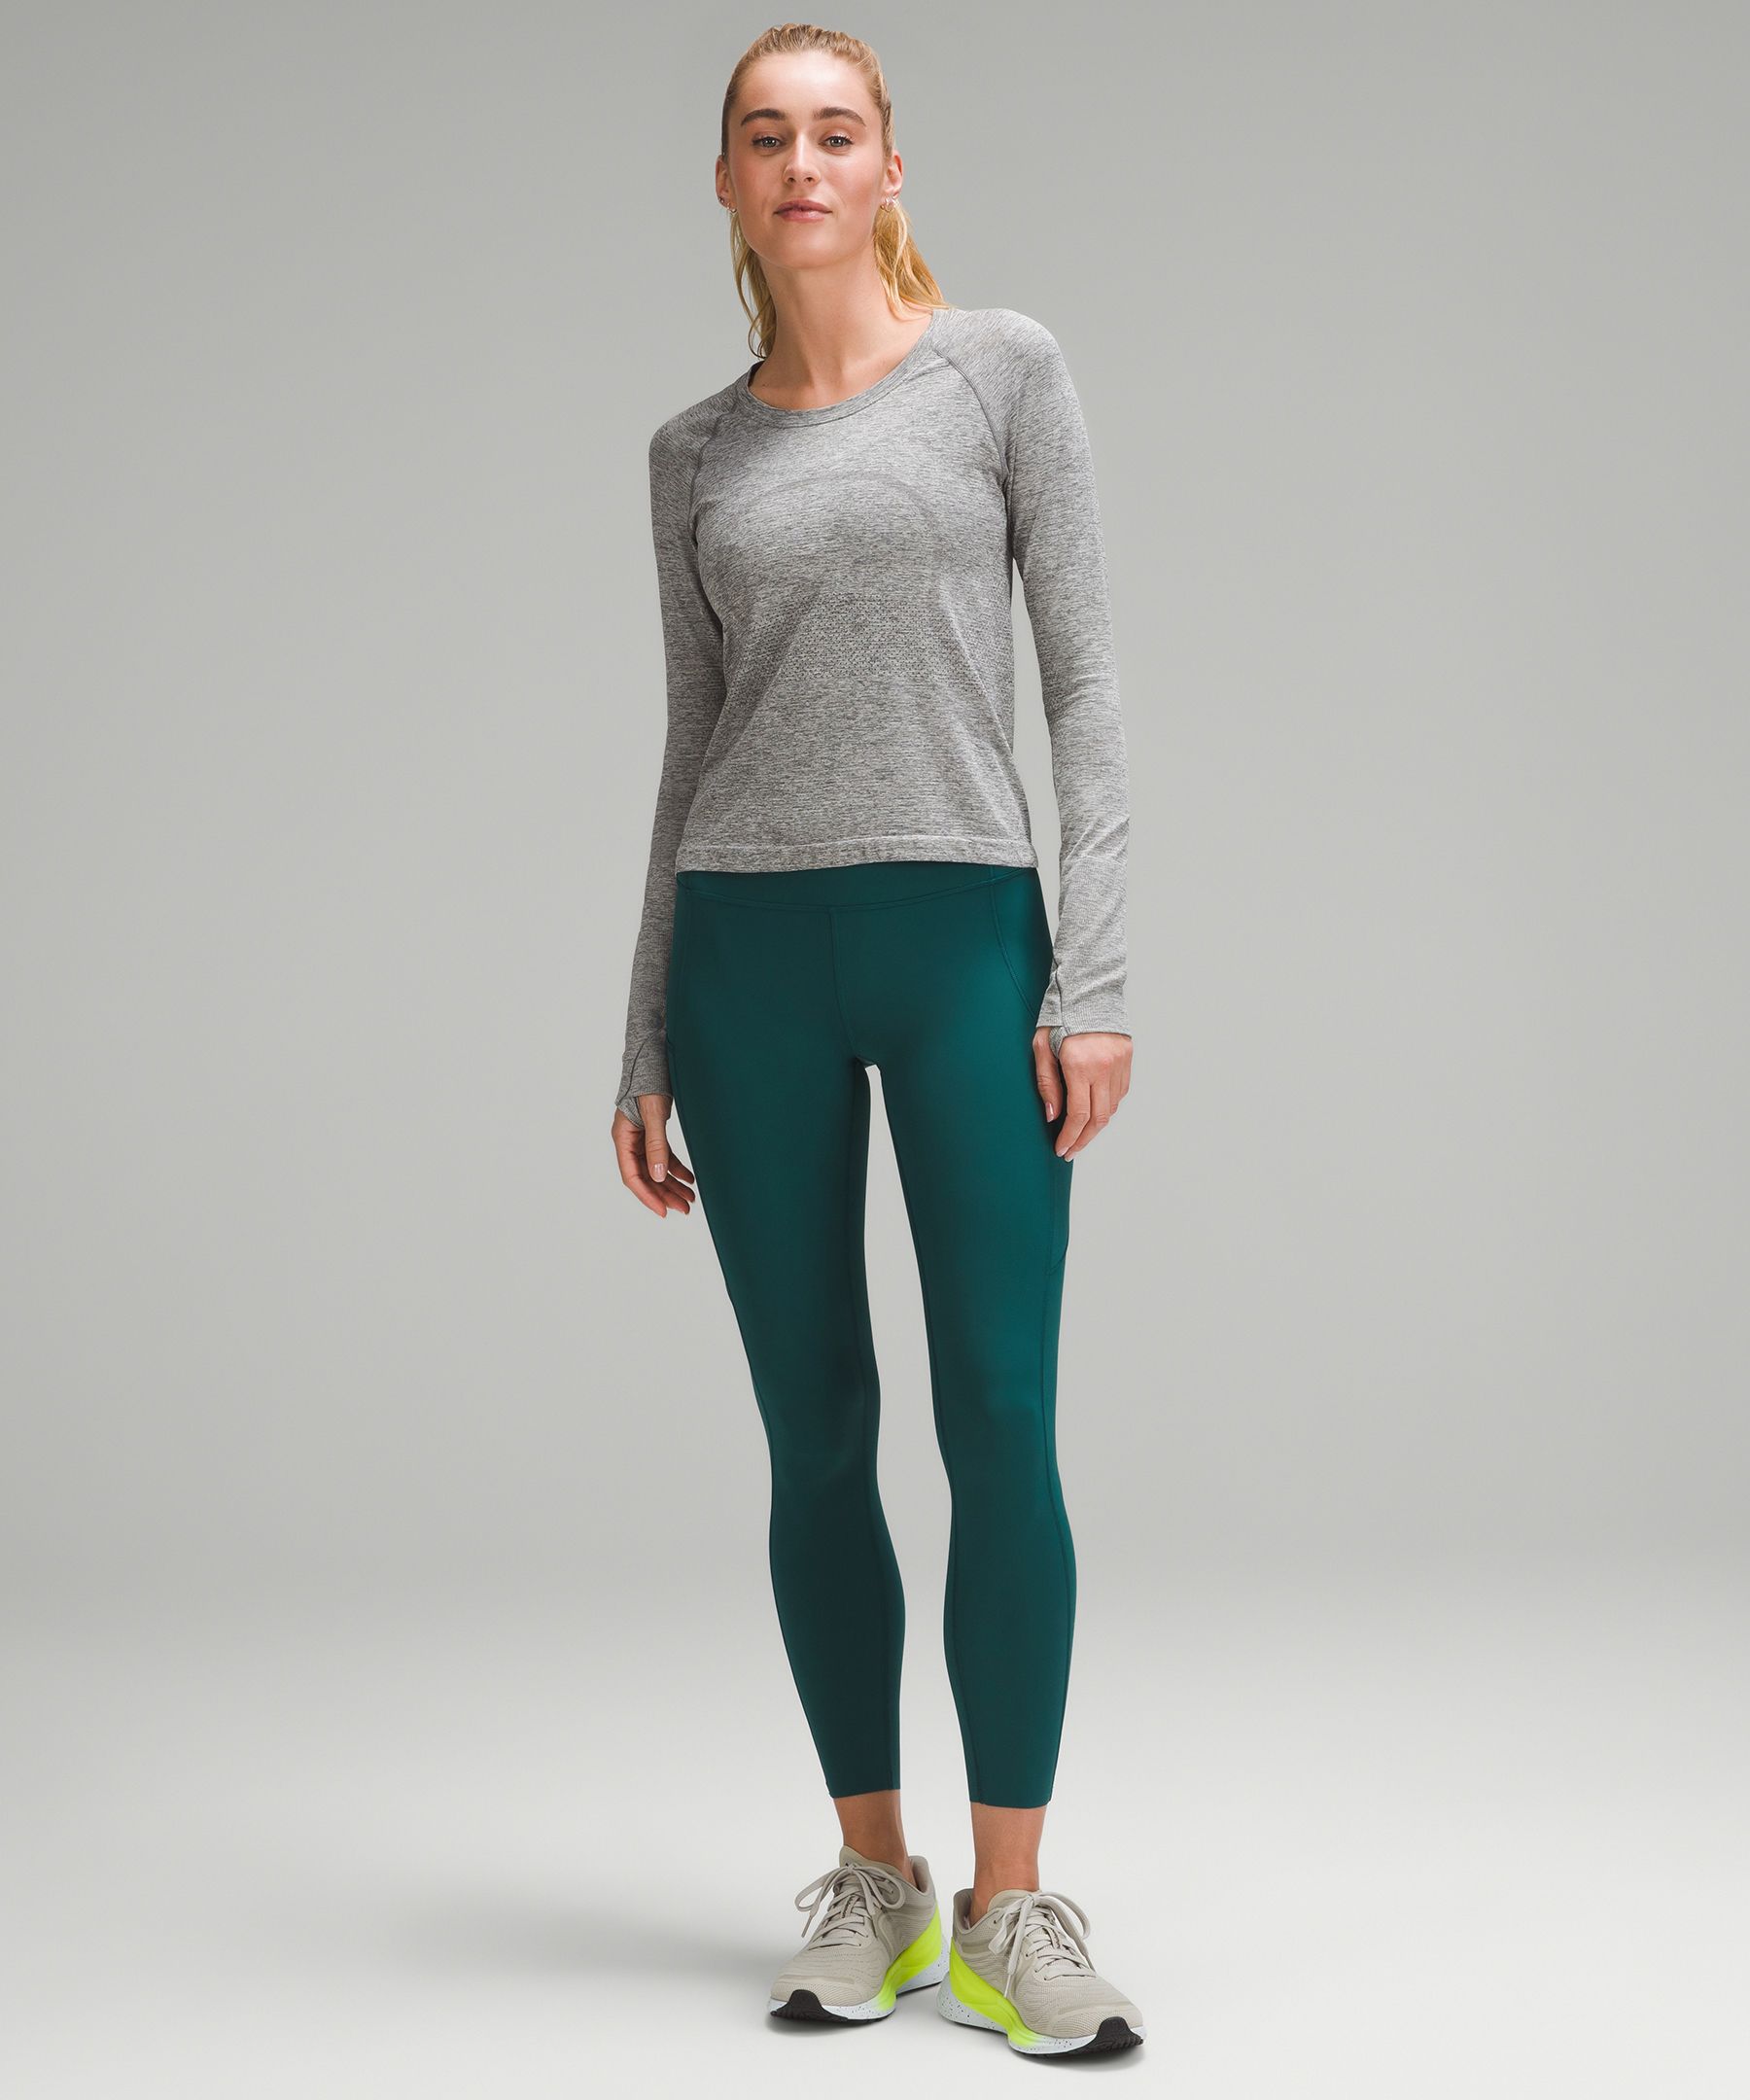 Athleisure wear is definitely one of my favorite categories of fashion! @ lululemon is a go-to for me - from leggings to sweatshirts, I lo